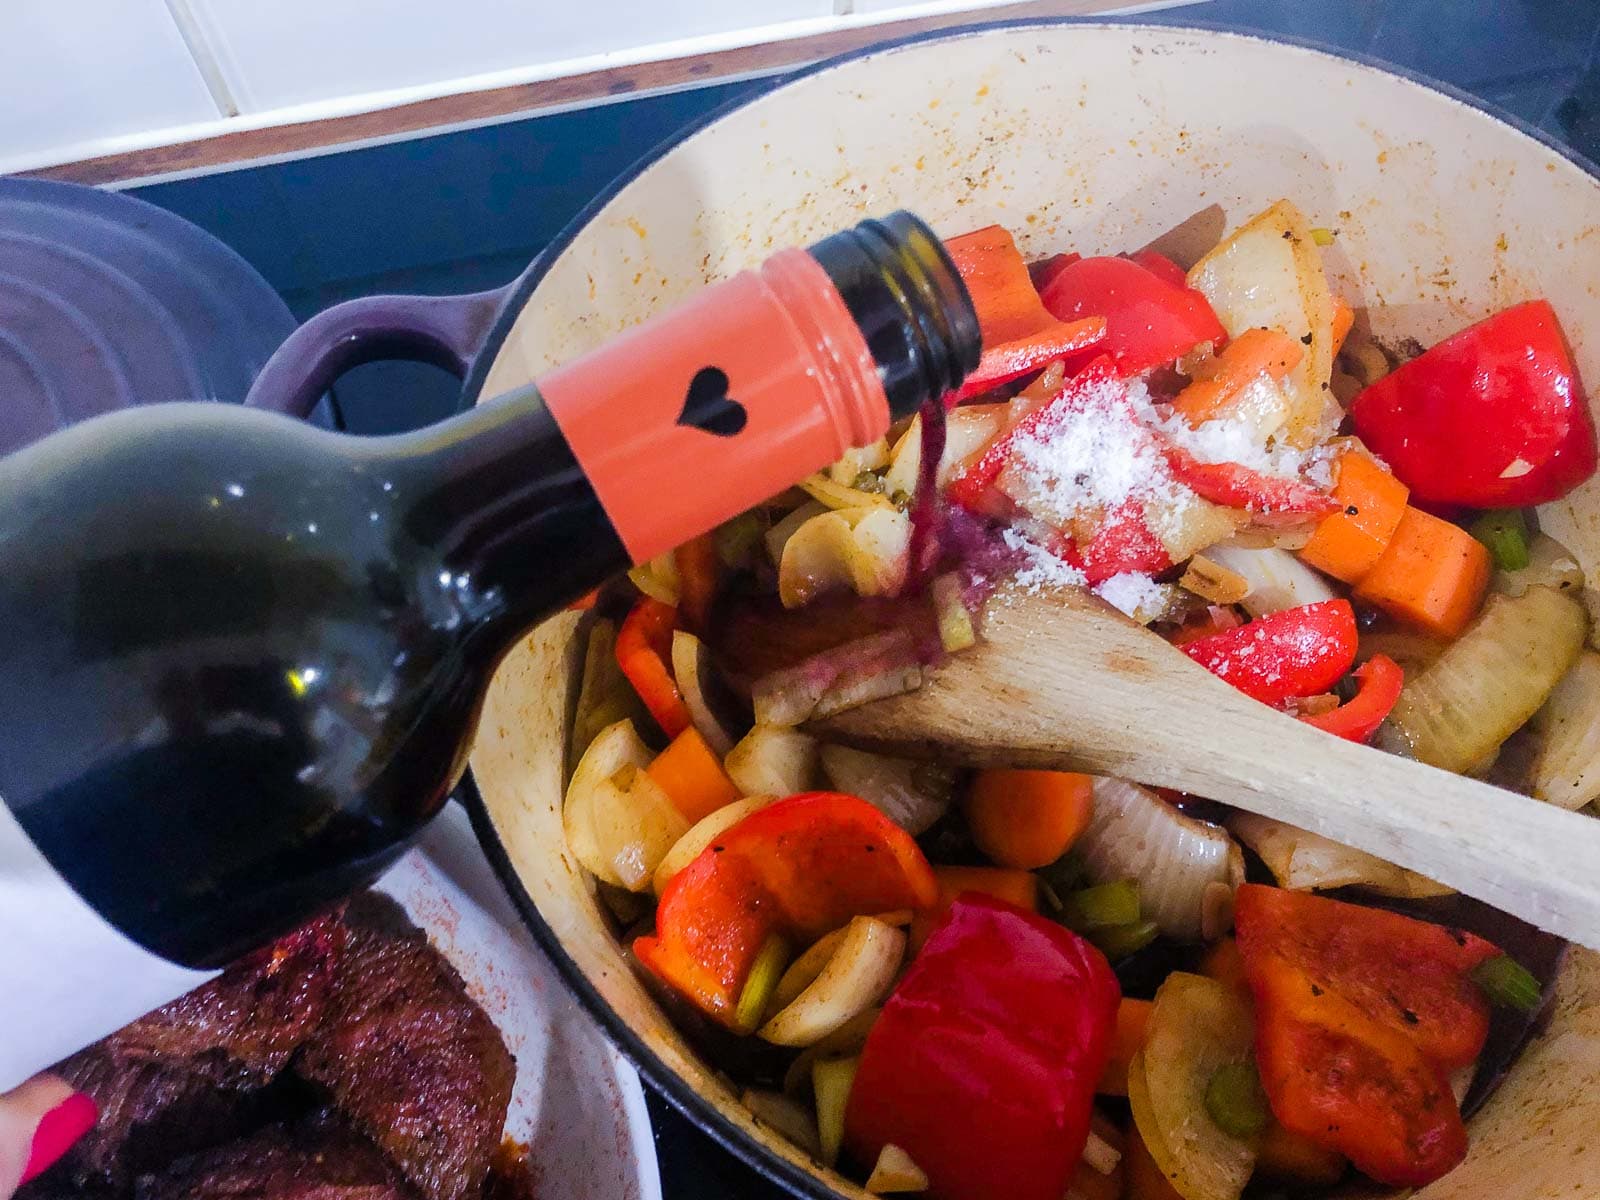 A hand adding red wine from a bottle to chopped vegetables in preparation of making a paprika beef casserole with the diced beef just at the bottom ready to add to the casserole.